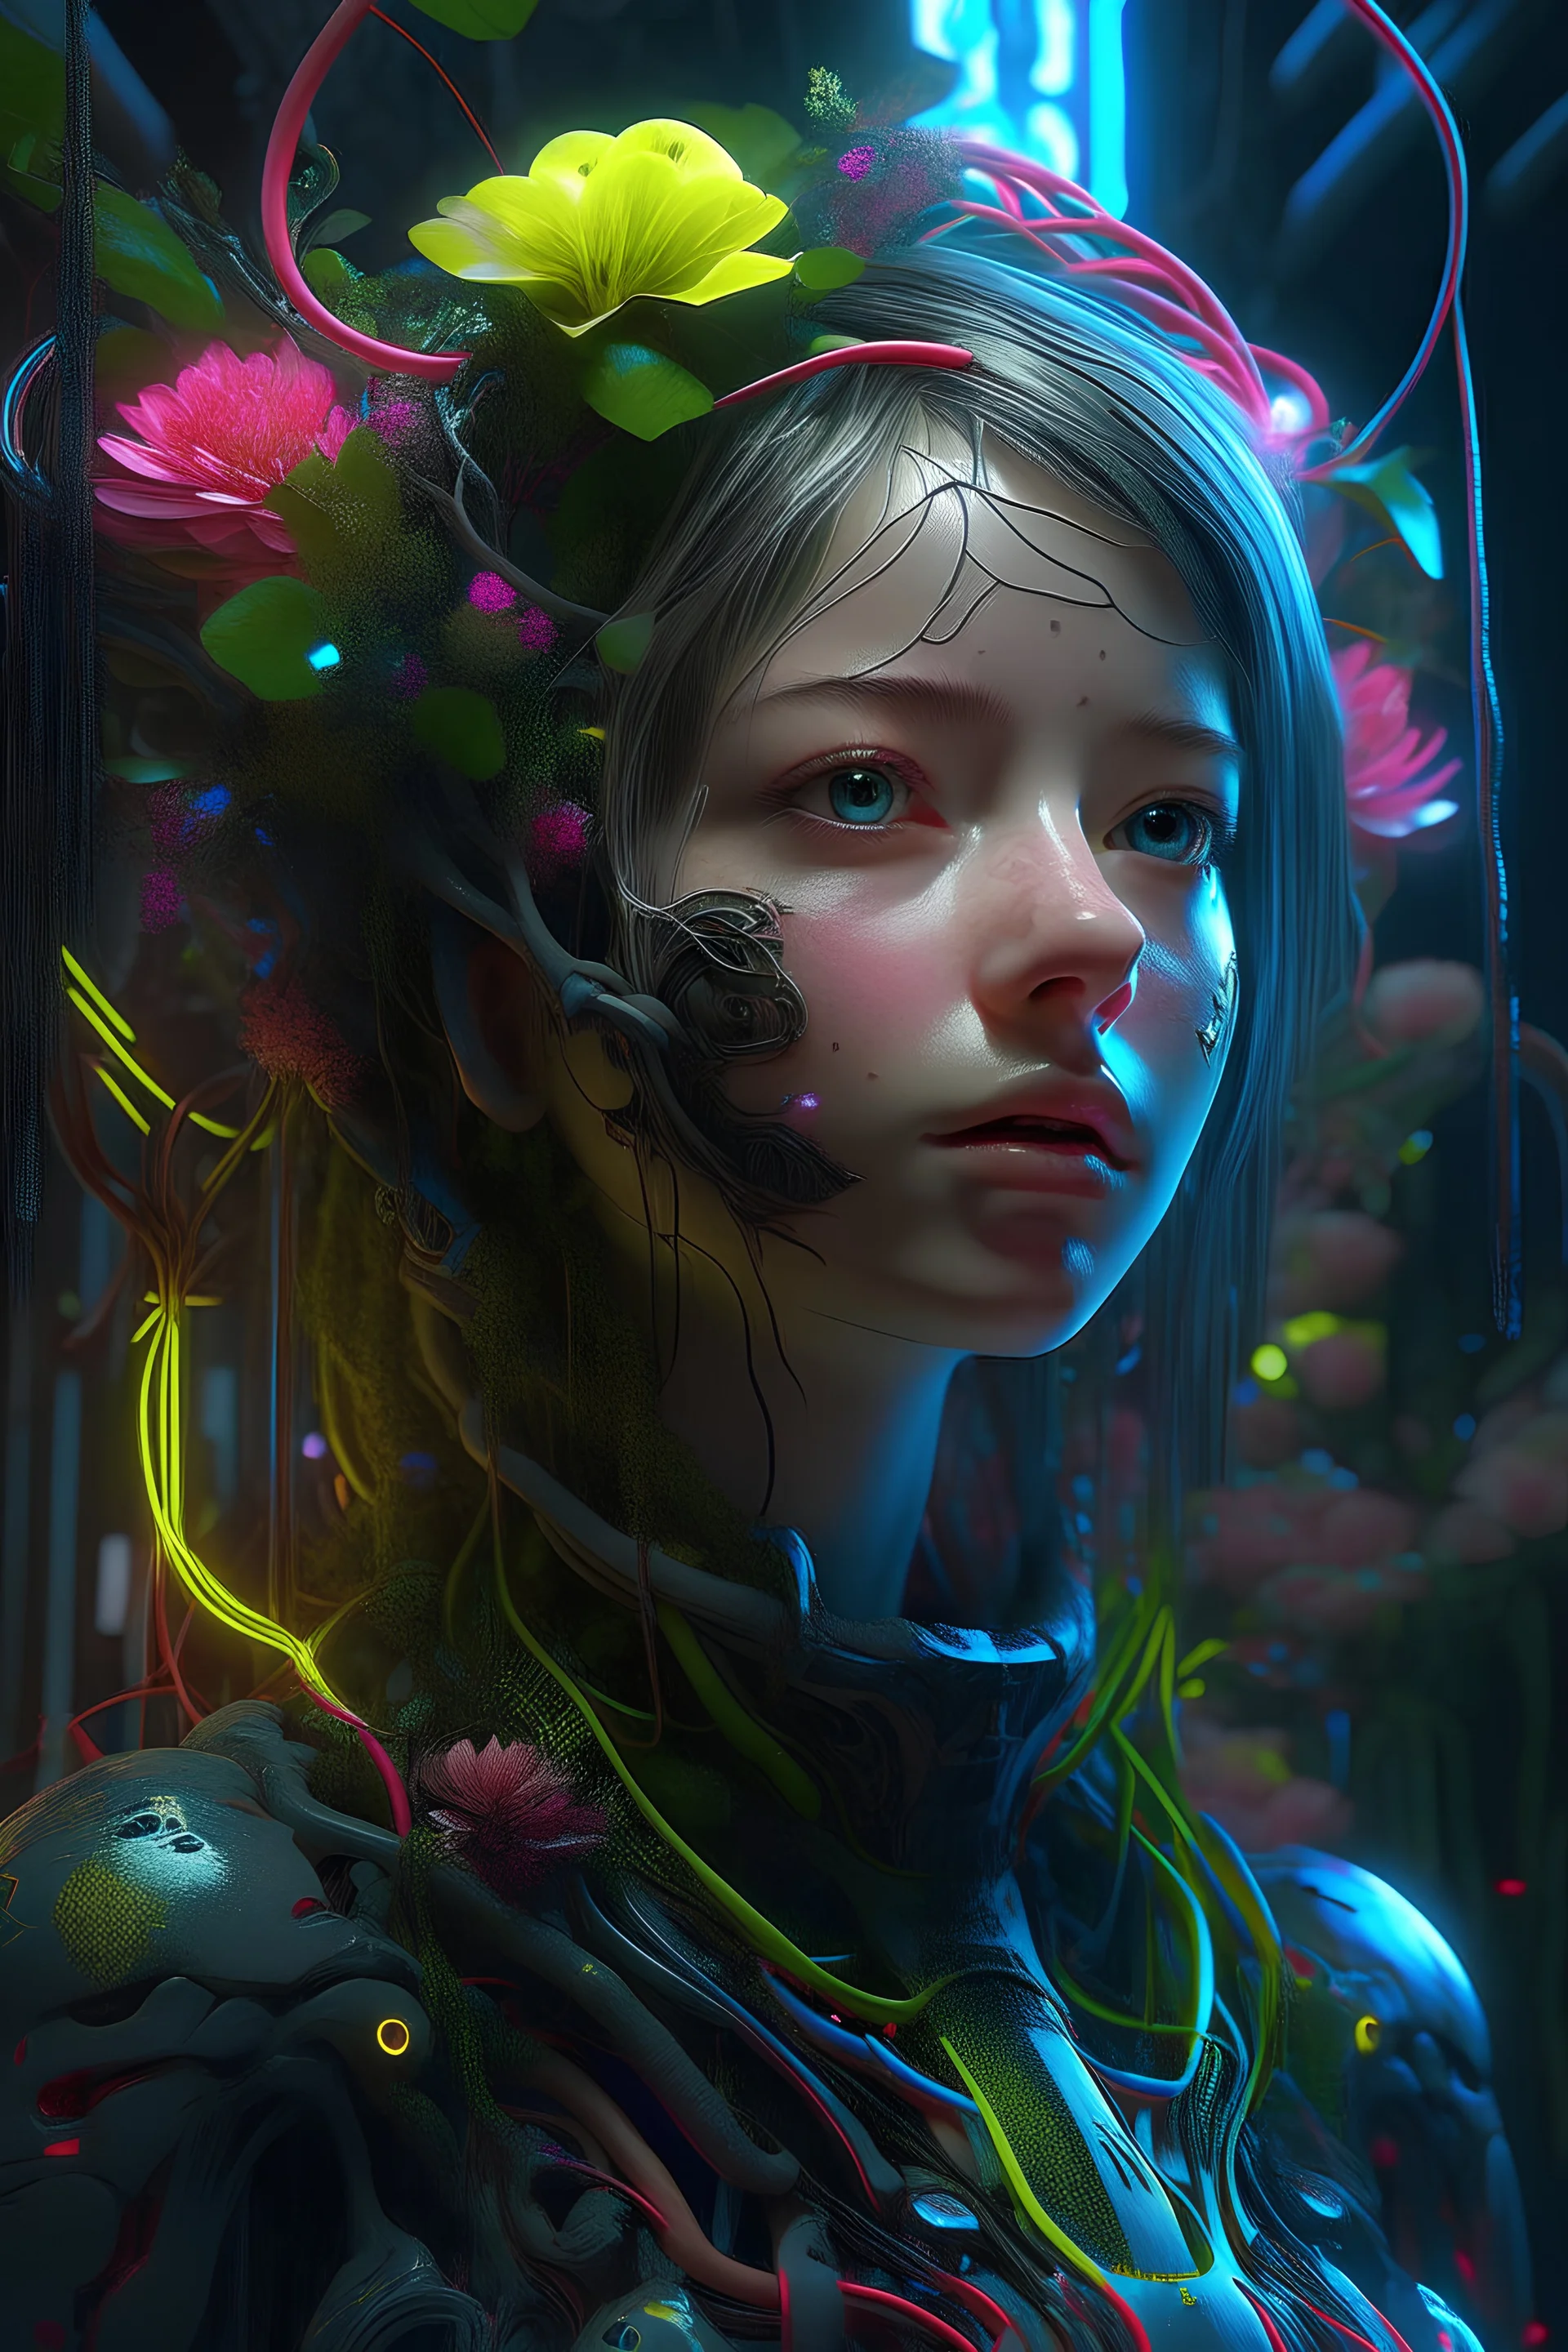 Expressively detailed and intricate 3d rendering of a hyperrealistic: Caucasian girl girl, cyberpunk flowers, neon, vines, flying insect, front view, dripping colorful paint, tribalism, gothic, shamanism, cosmic fractals, dystopian, dendritic, artstation: award-winning: professional portrait: atmospheric: commanding: fantastical: clarity: 16k: ultra quality: striking: brilliance: stunning colors: amazing depth